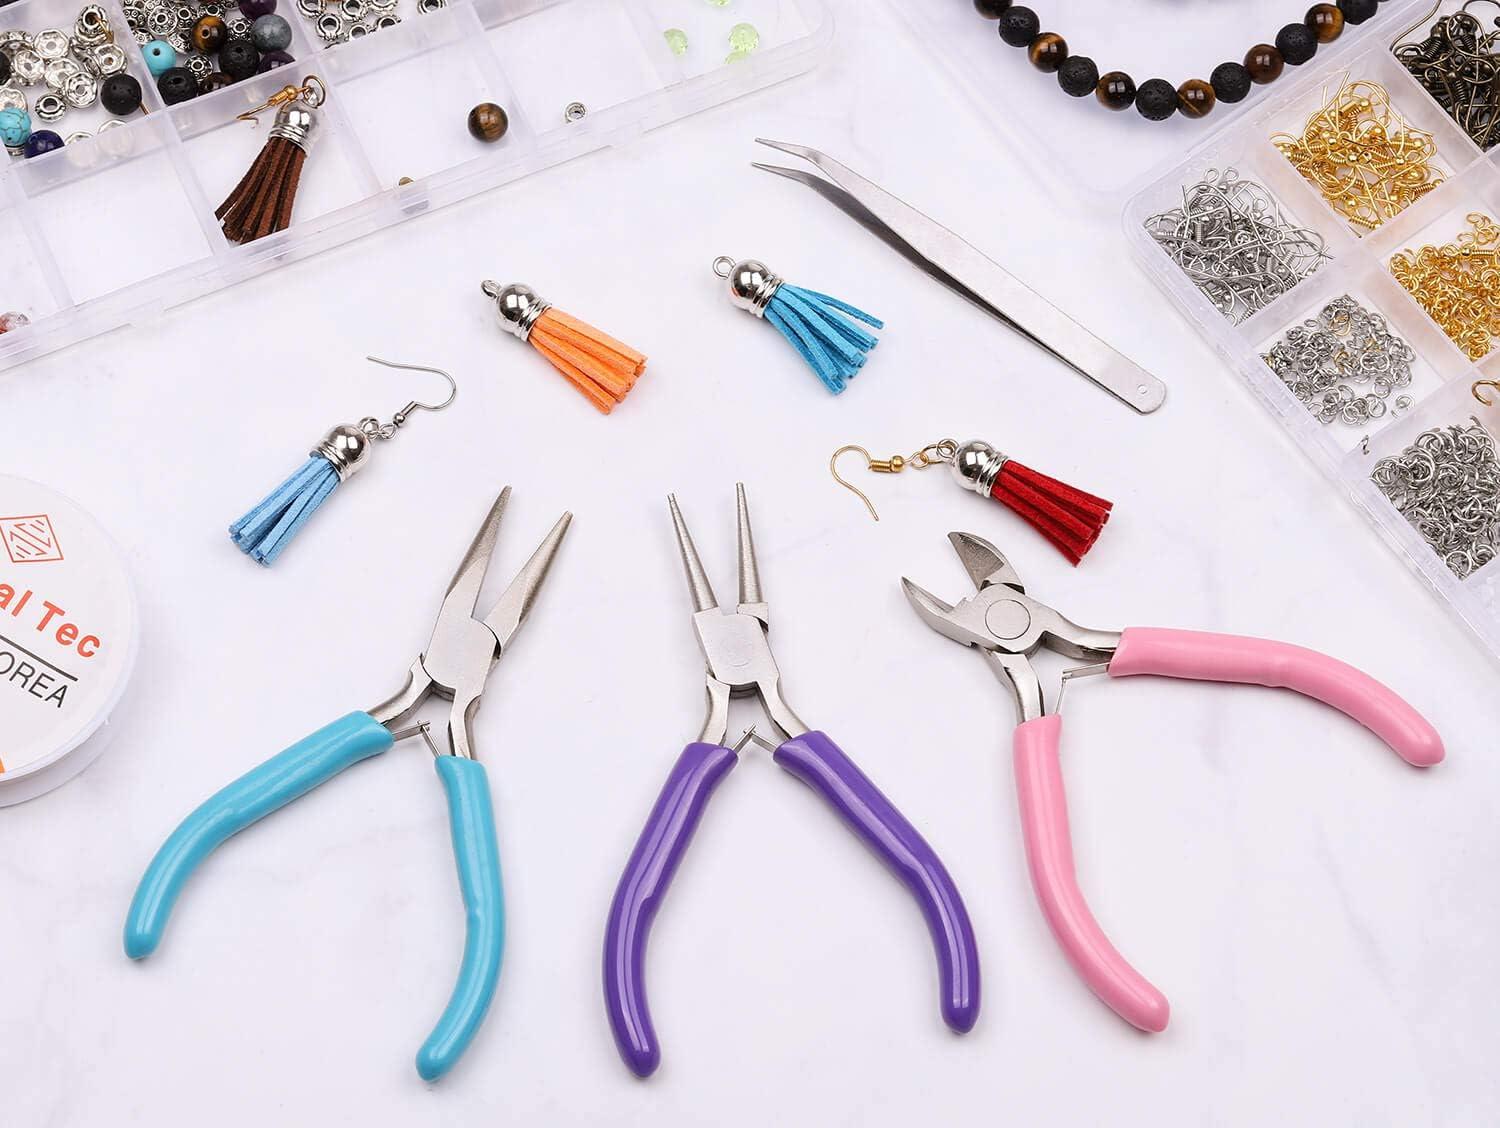 Songin songin jewelry making kit, jewelry making repair suppies tools for  adults, wire wrapping kit with pliers for jewelry bracket